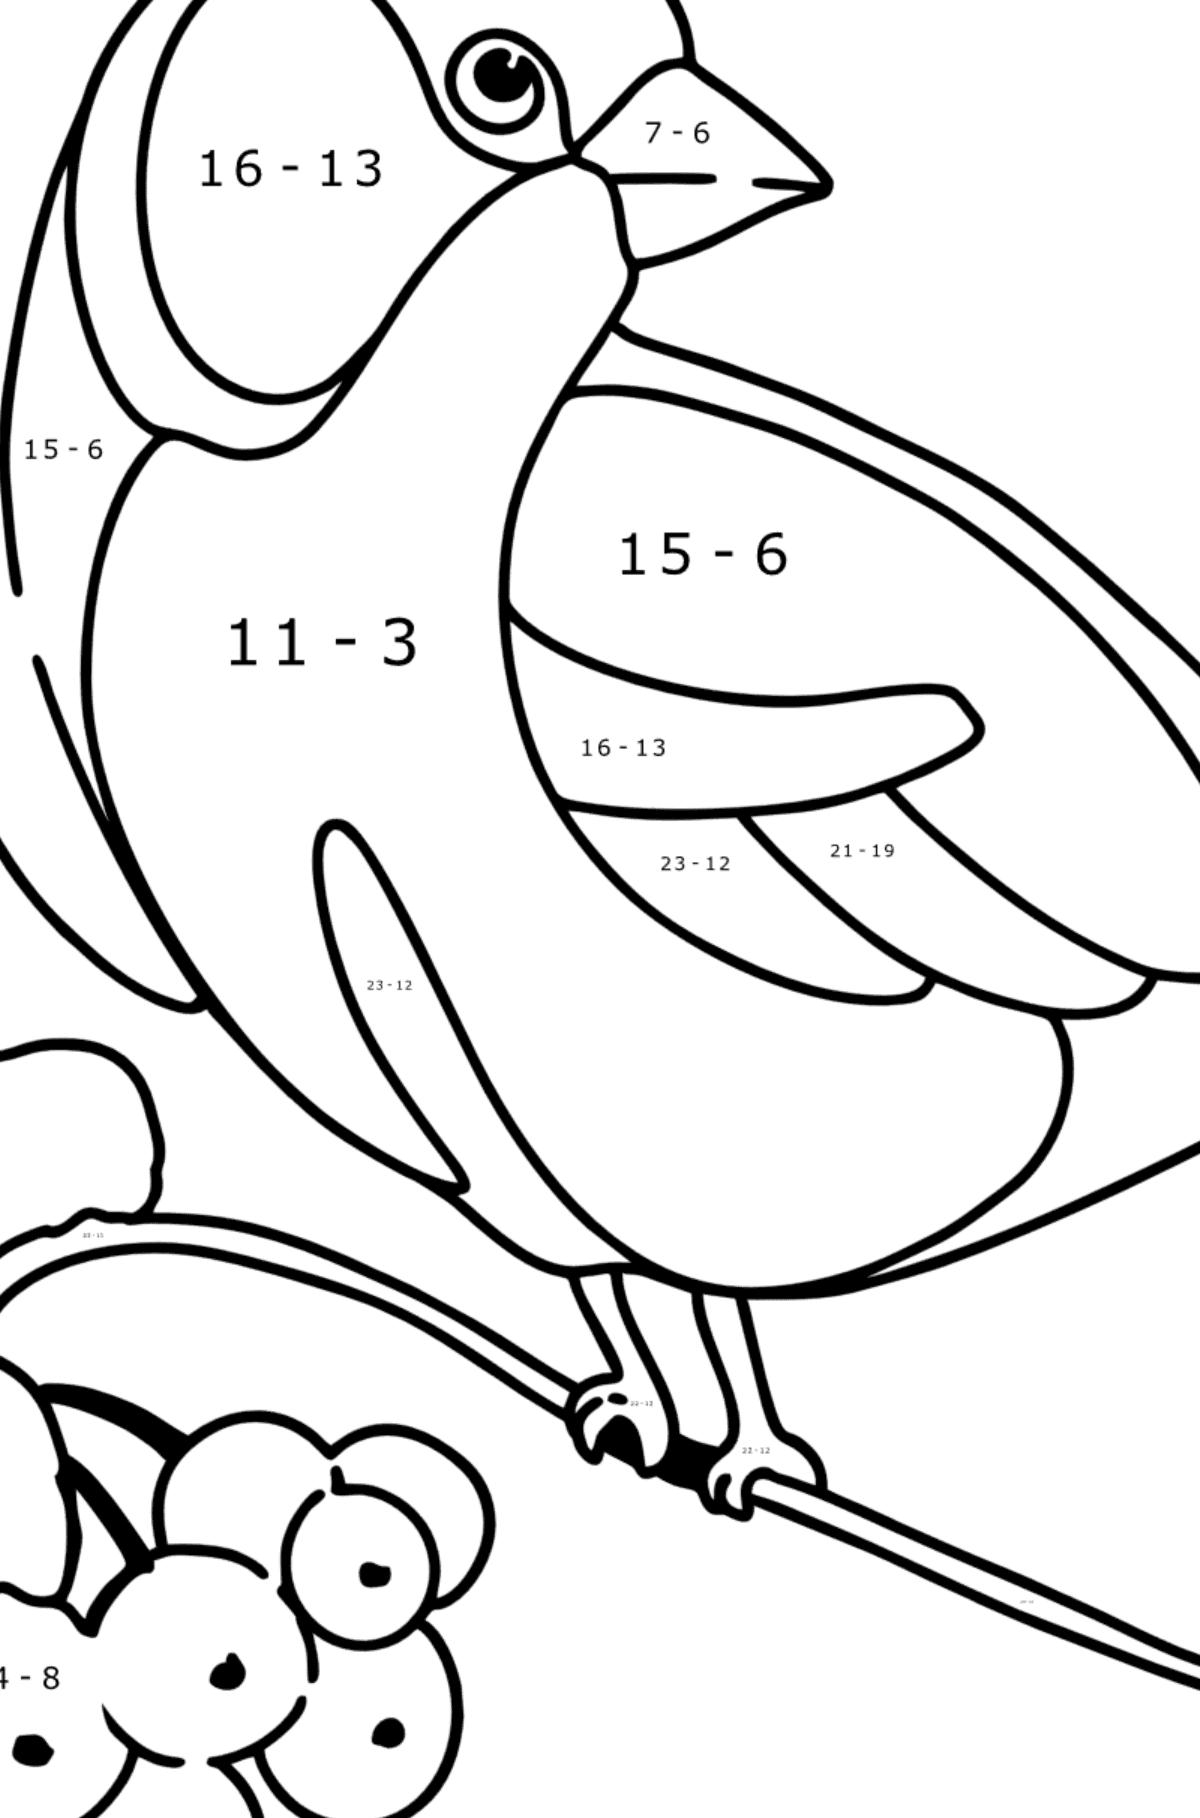 Coloring page - Titmouse on Mountain Ash - Math Coloring - Subtraction for Kids